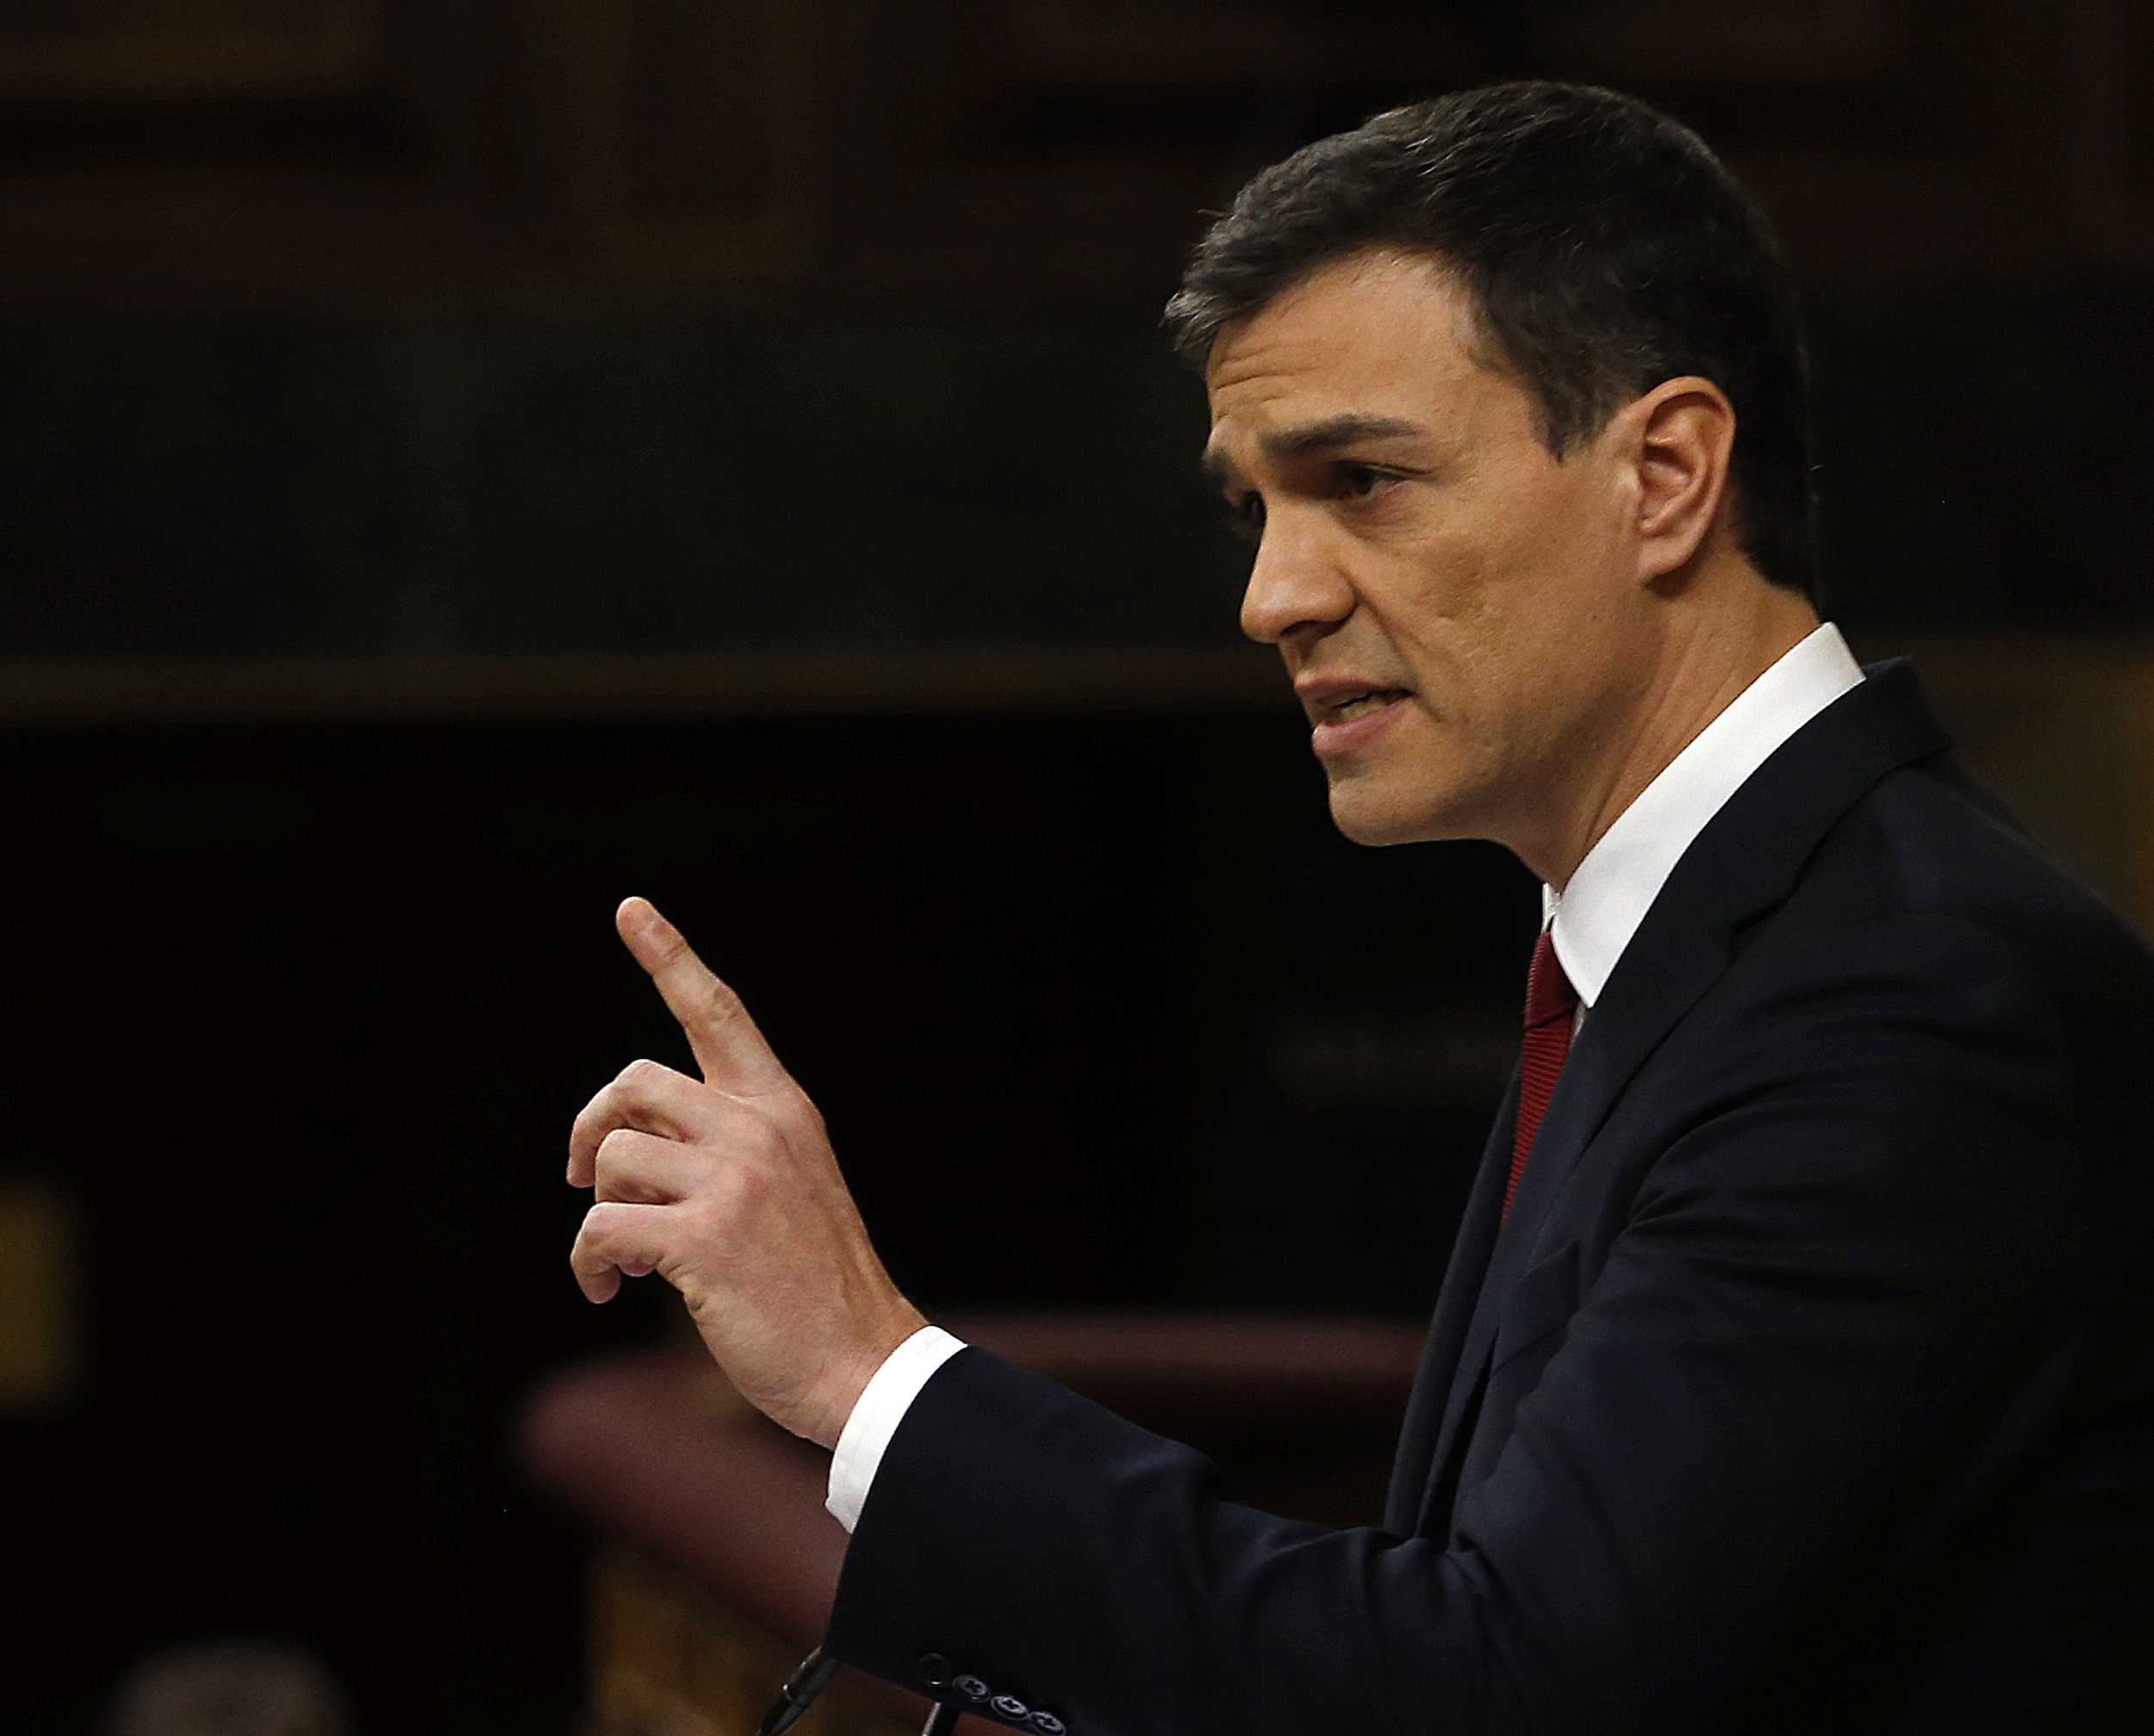 PSOE's leader, Pedro Sánchez during the first round of the investiture debate (by ACN)